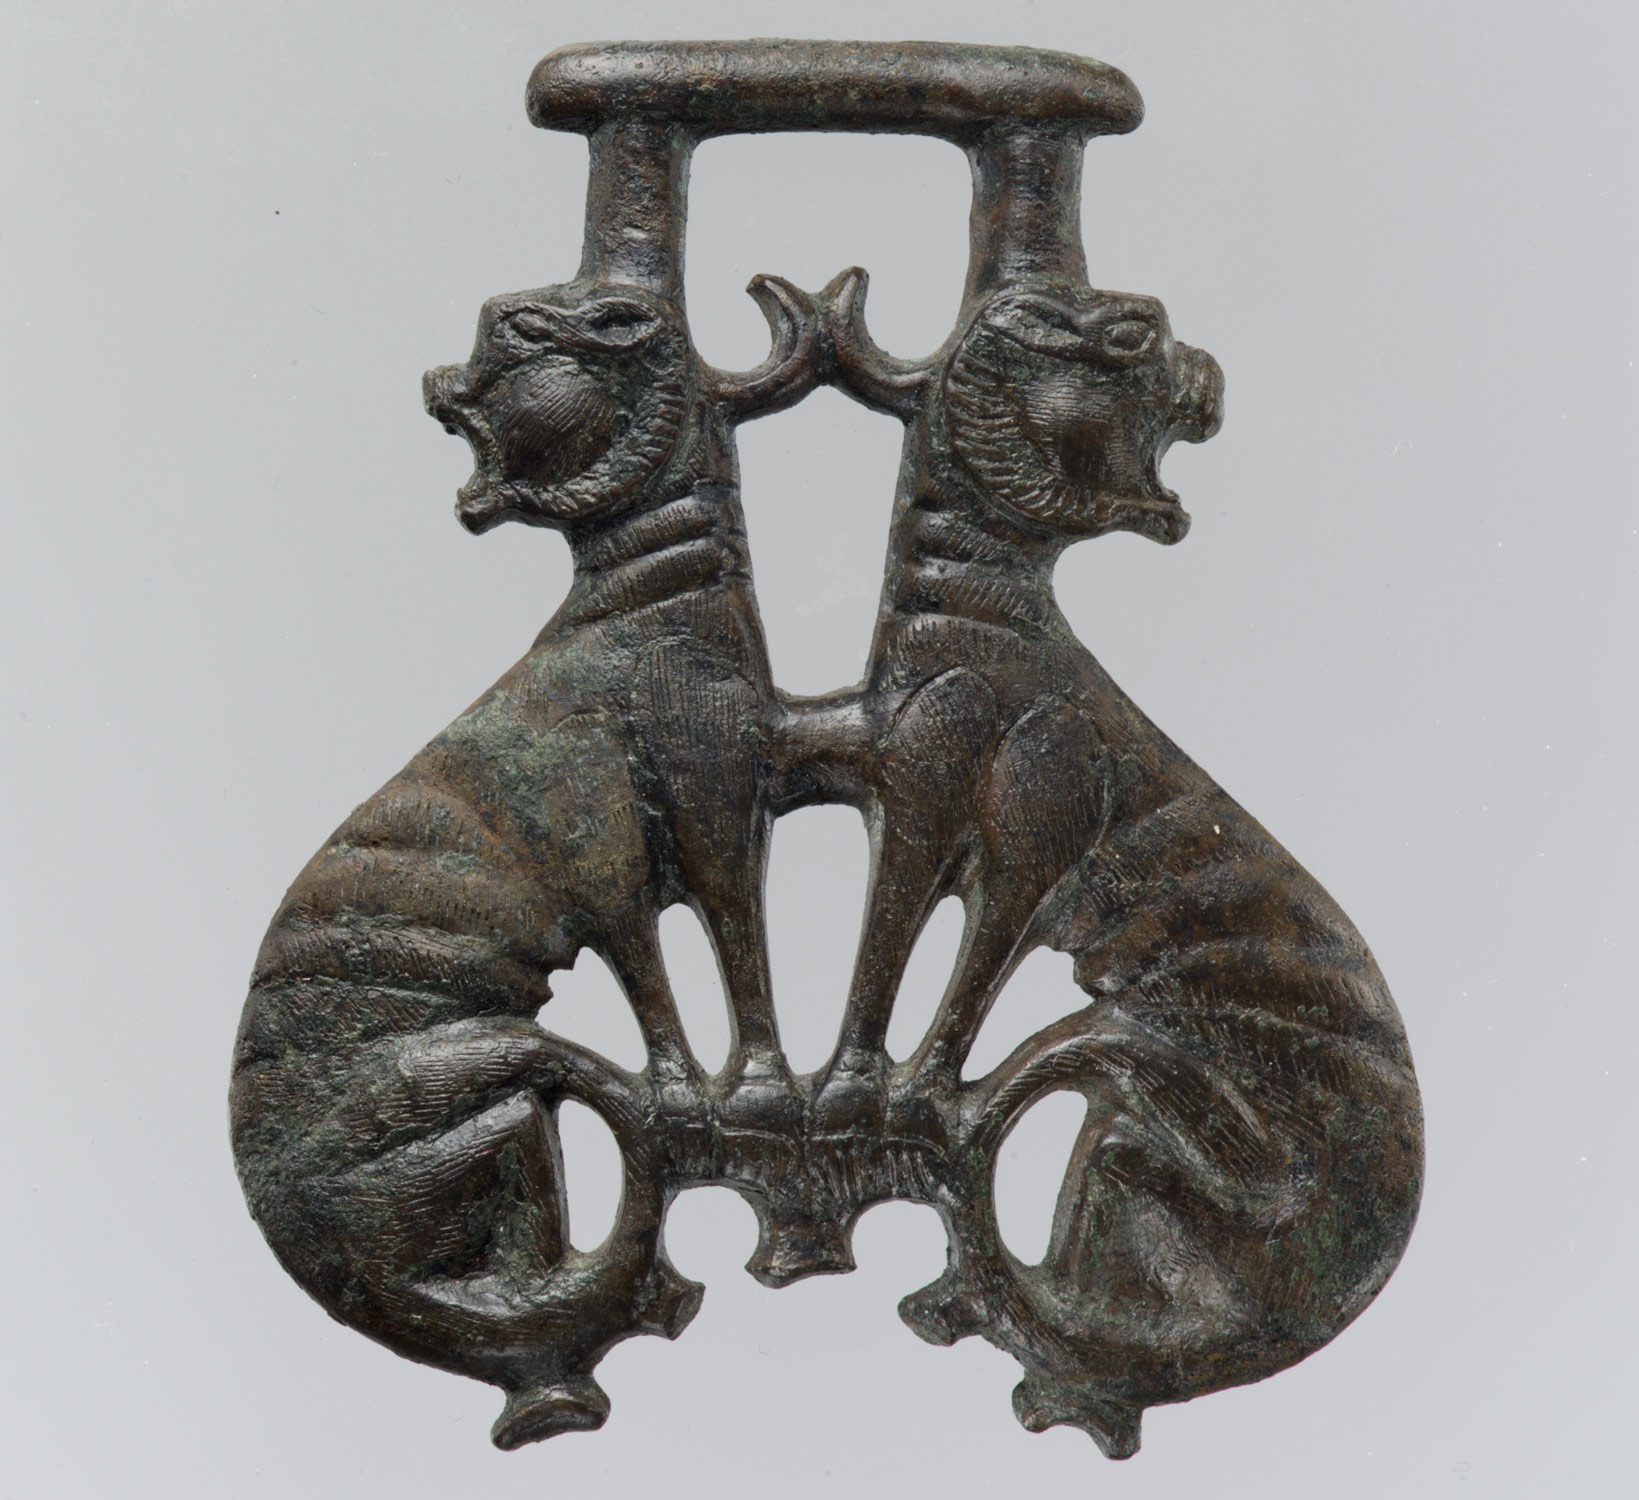 Harness Pendant with Confronted Beasts